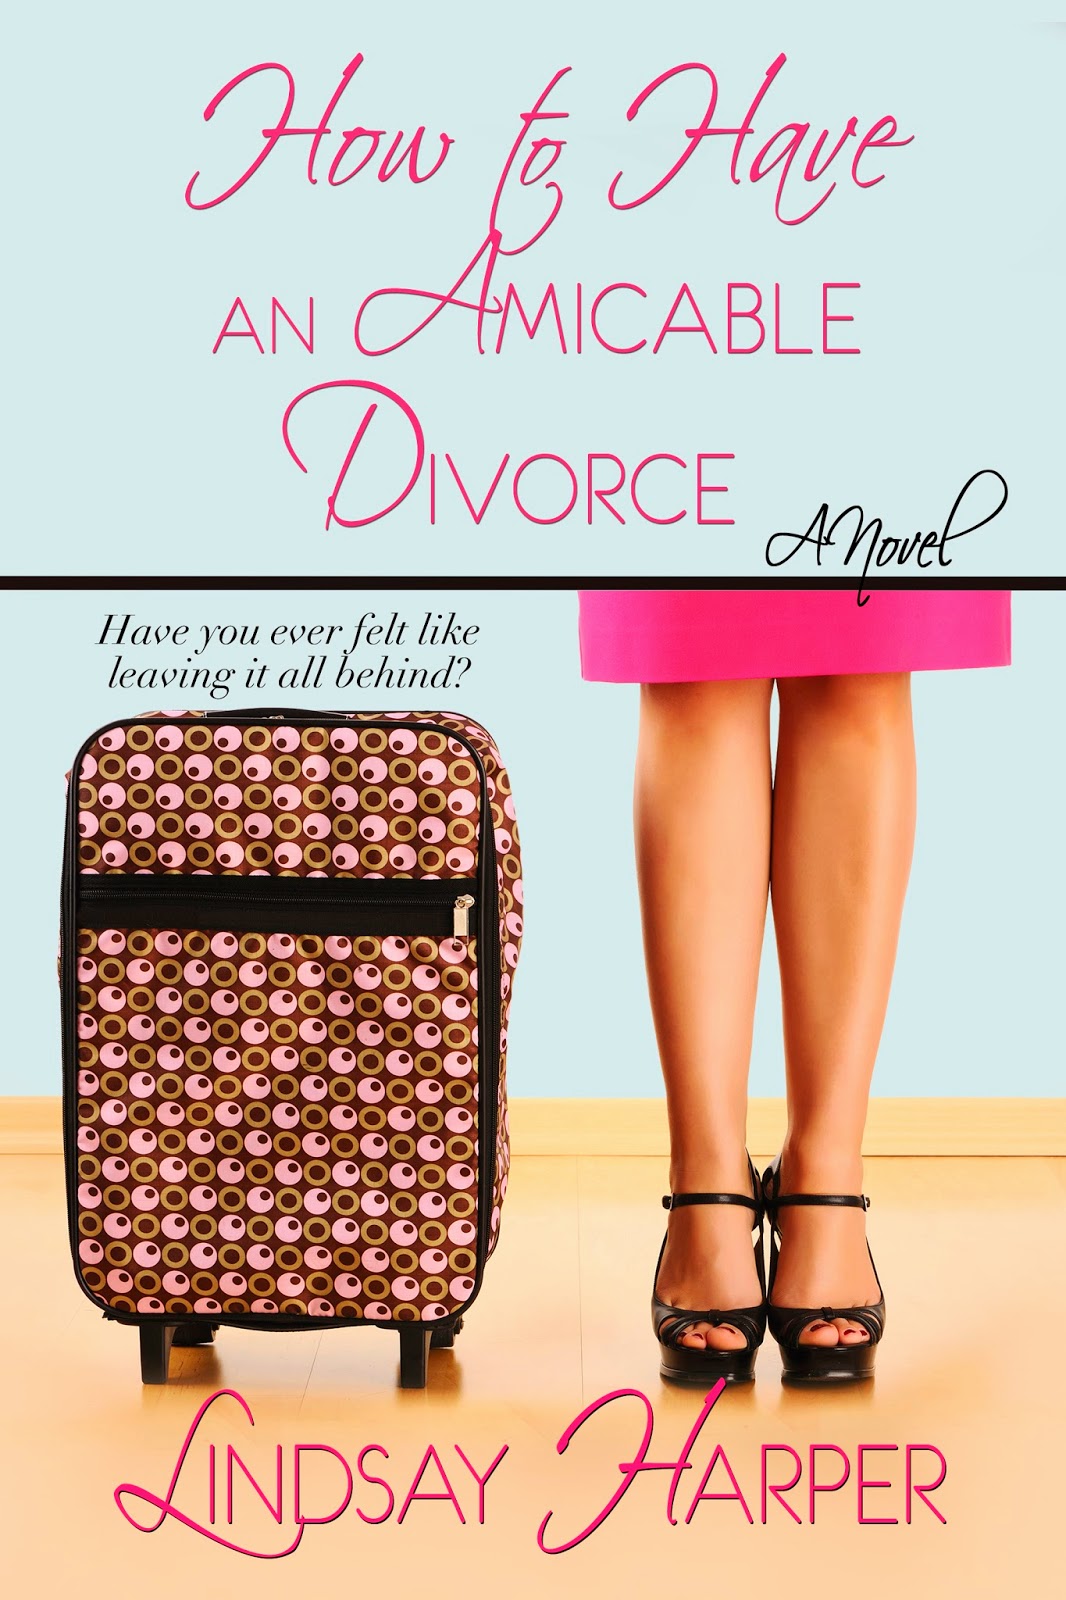 how to have an amicable divorce